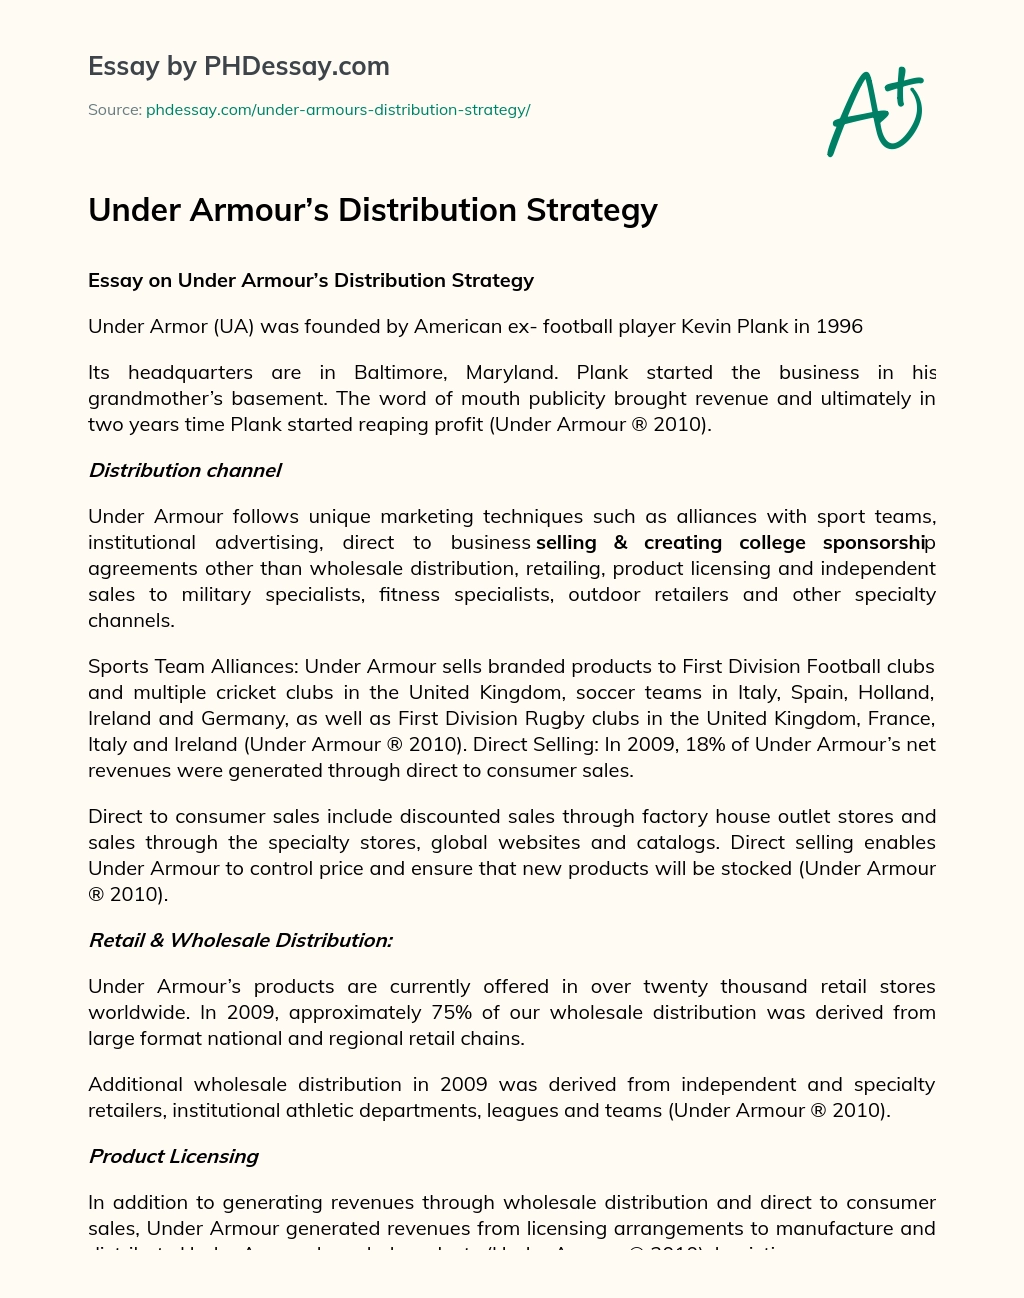 Under Armour’s Distribution Strategy essay